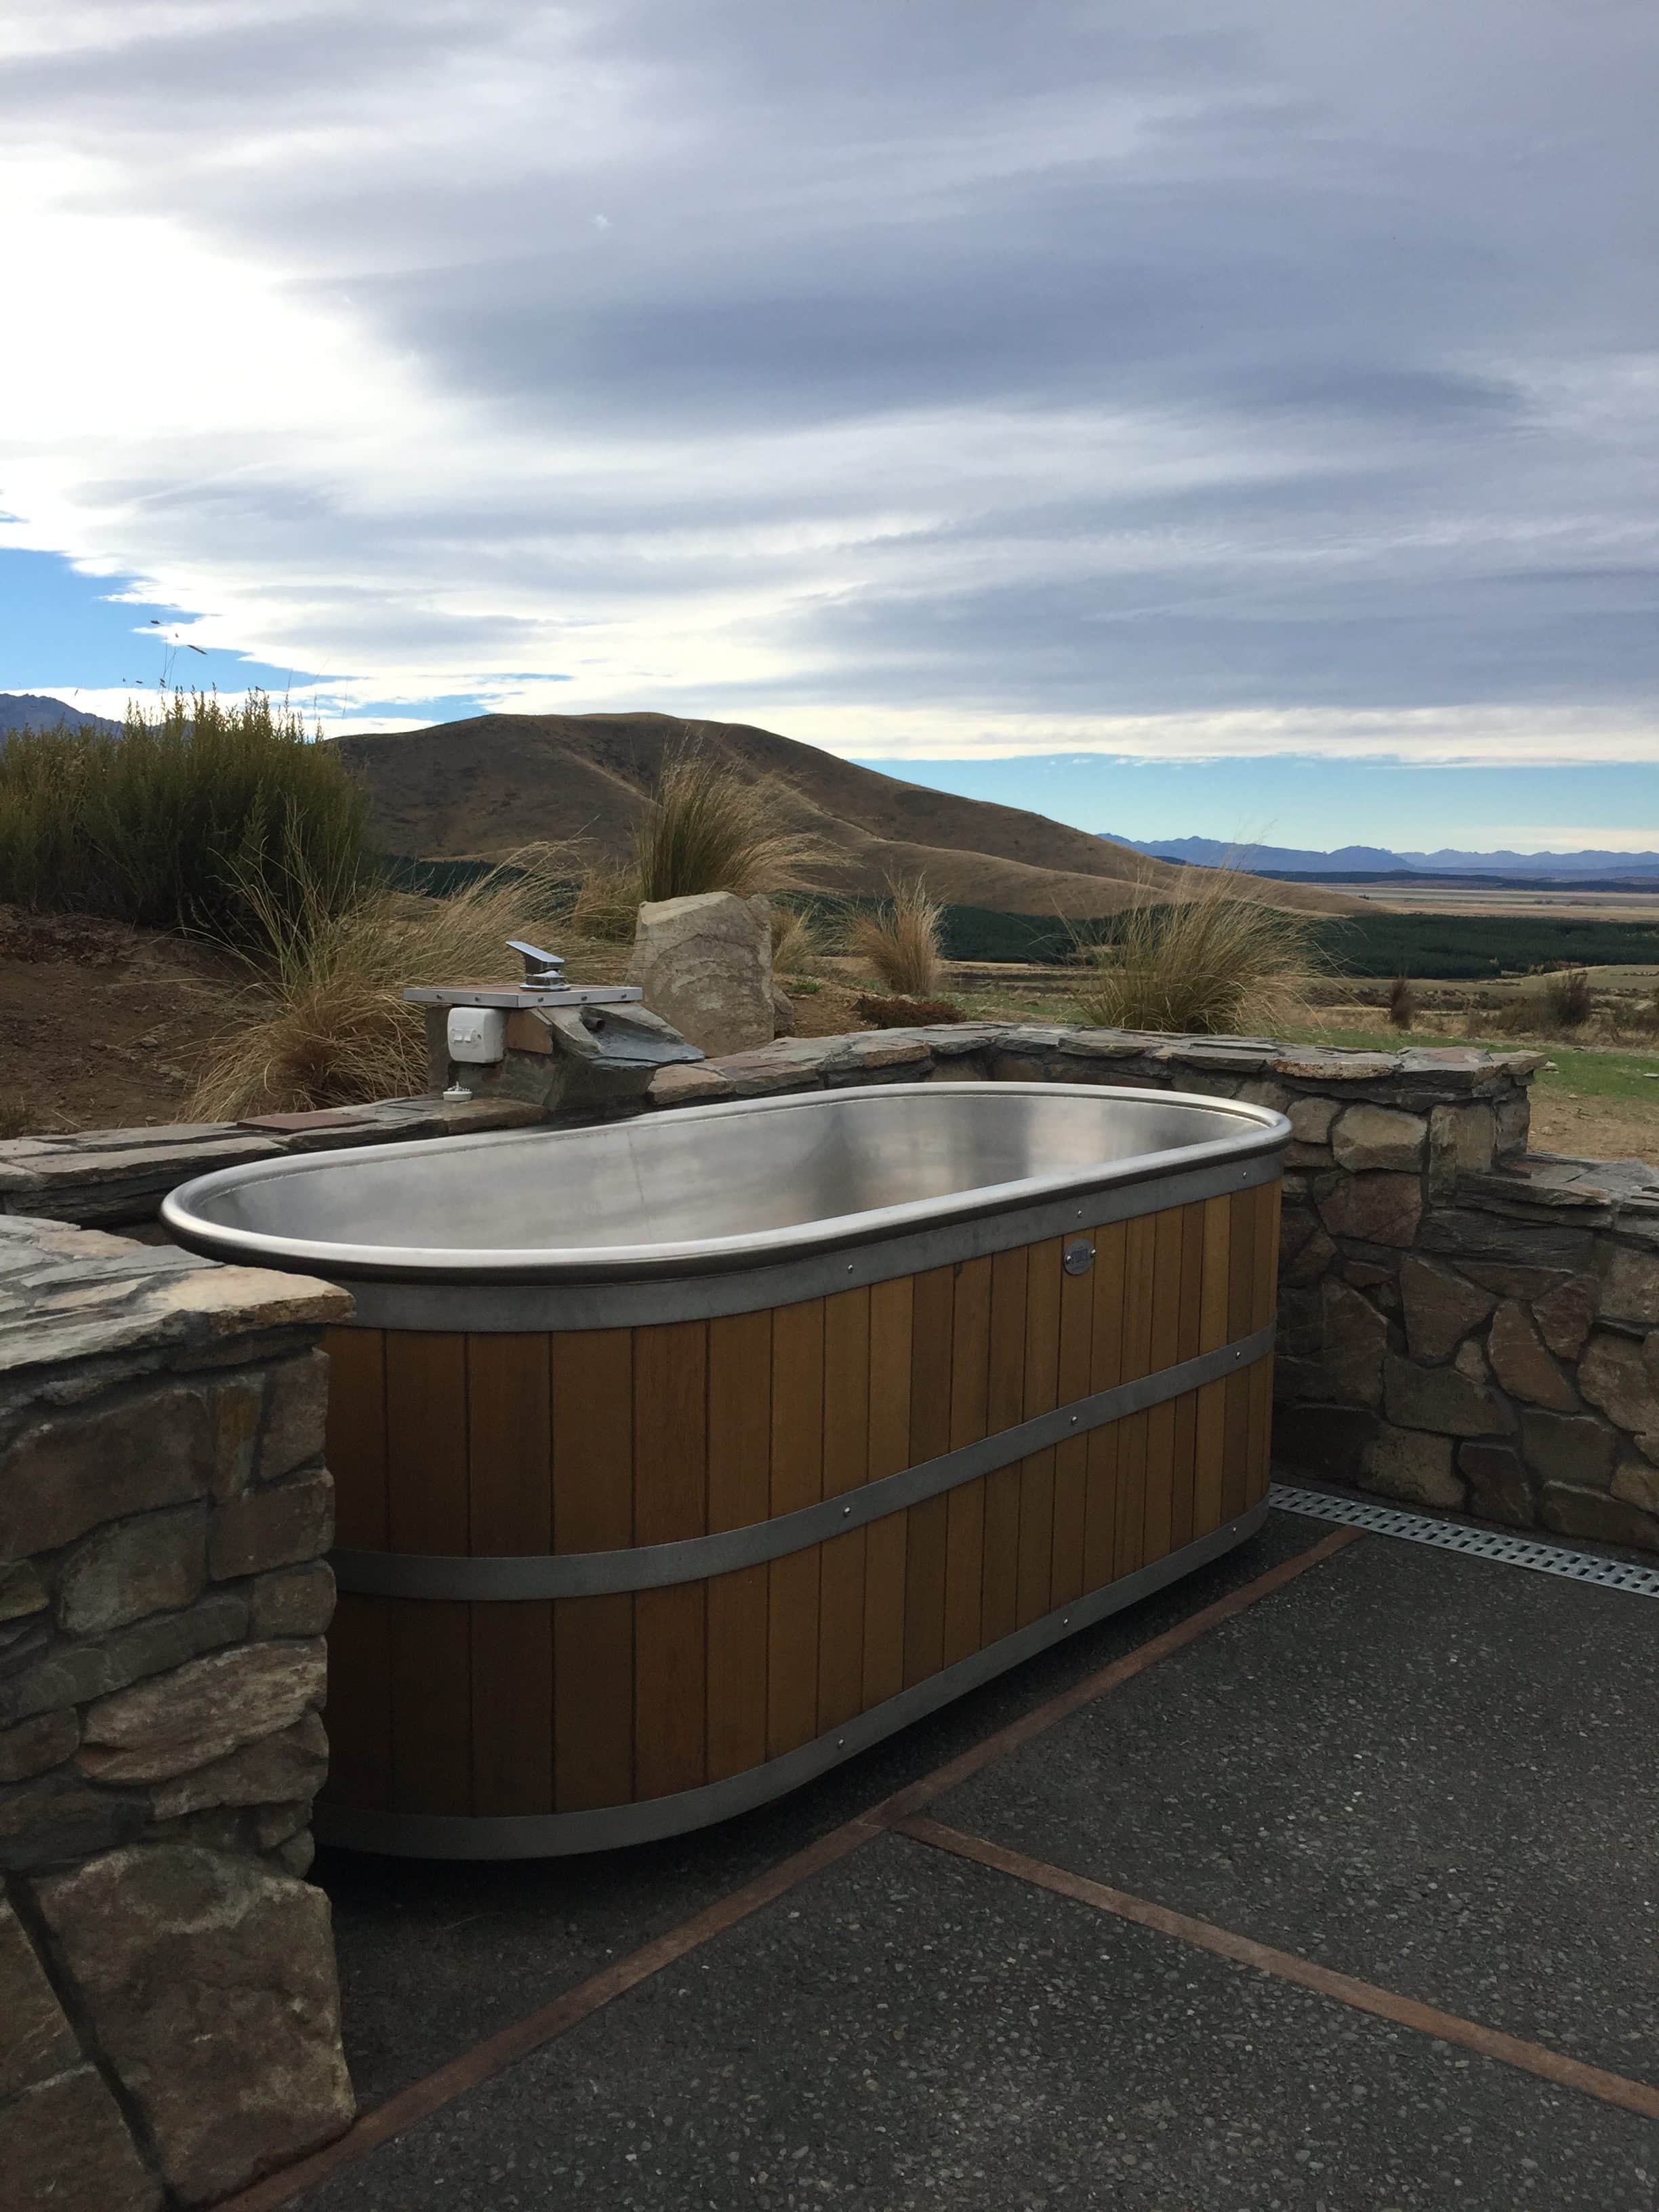  "Soak" stainless steel bath with its cedar sides fits perfectly into the natural landscape